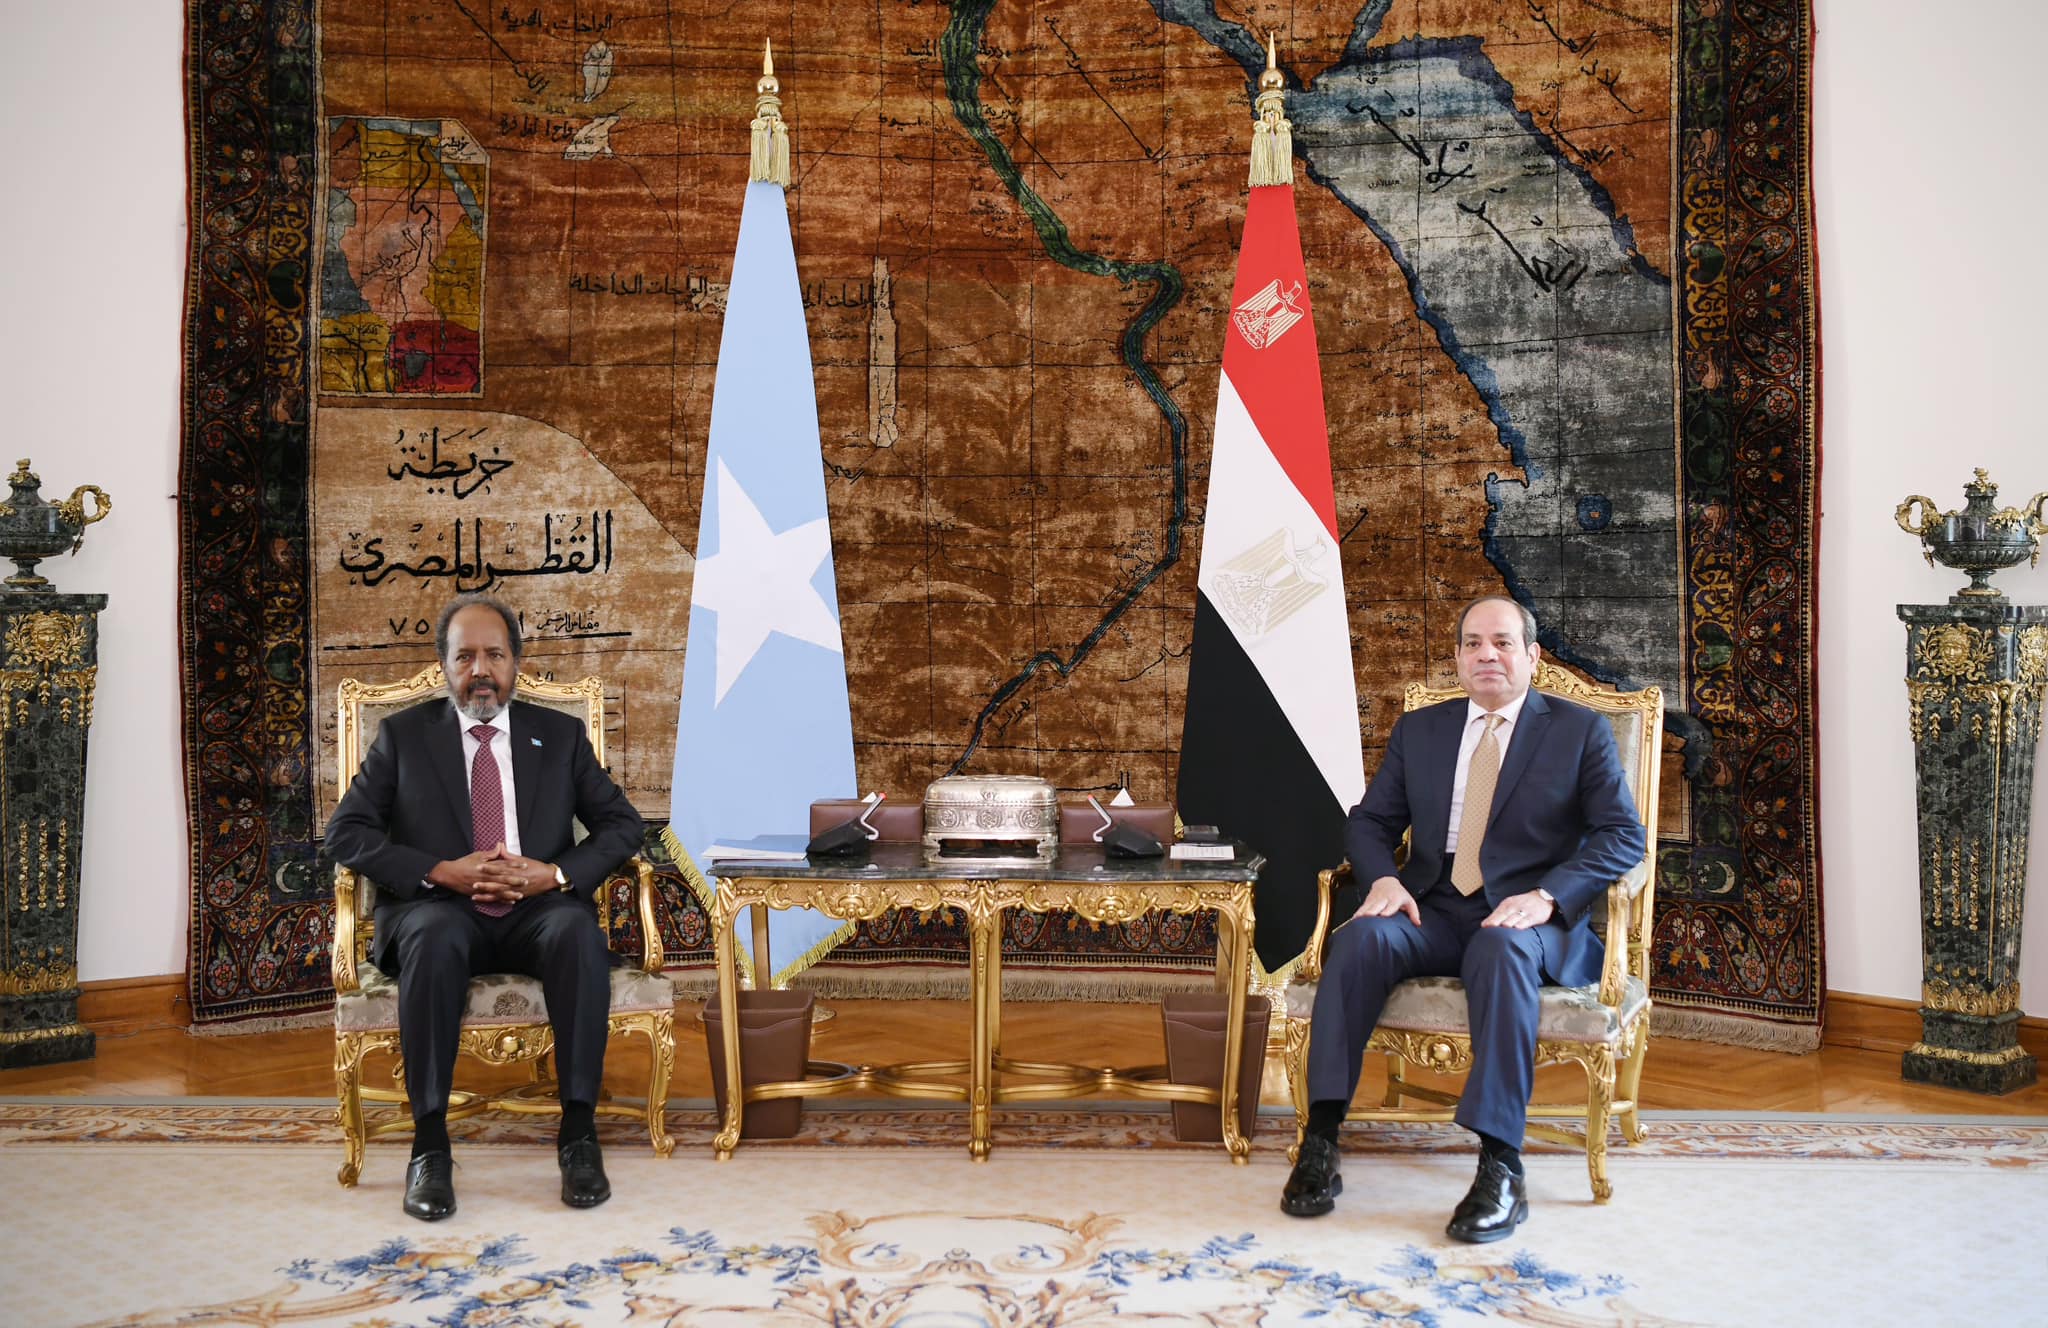 “No one will try Egypt.” President Sisi’s most prominent messages during a press conference with his Somali counterpart